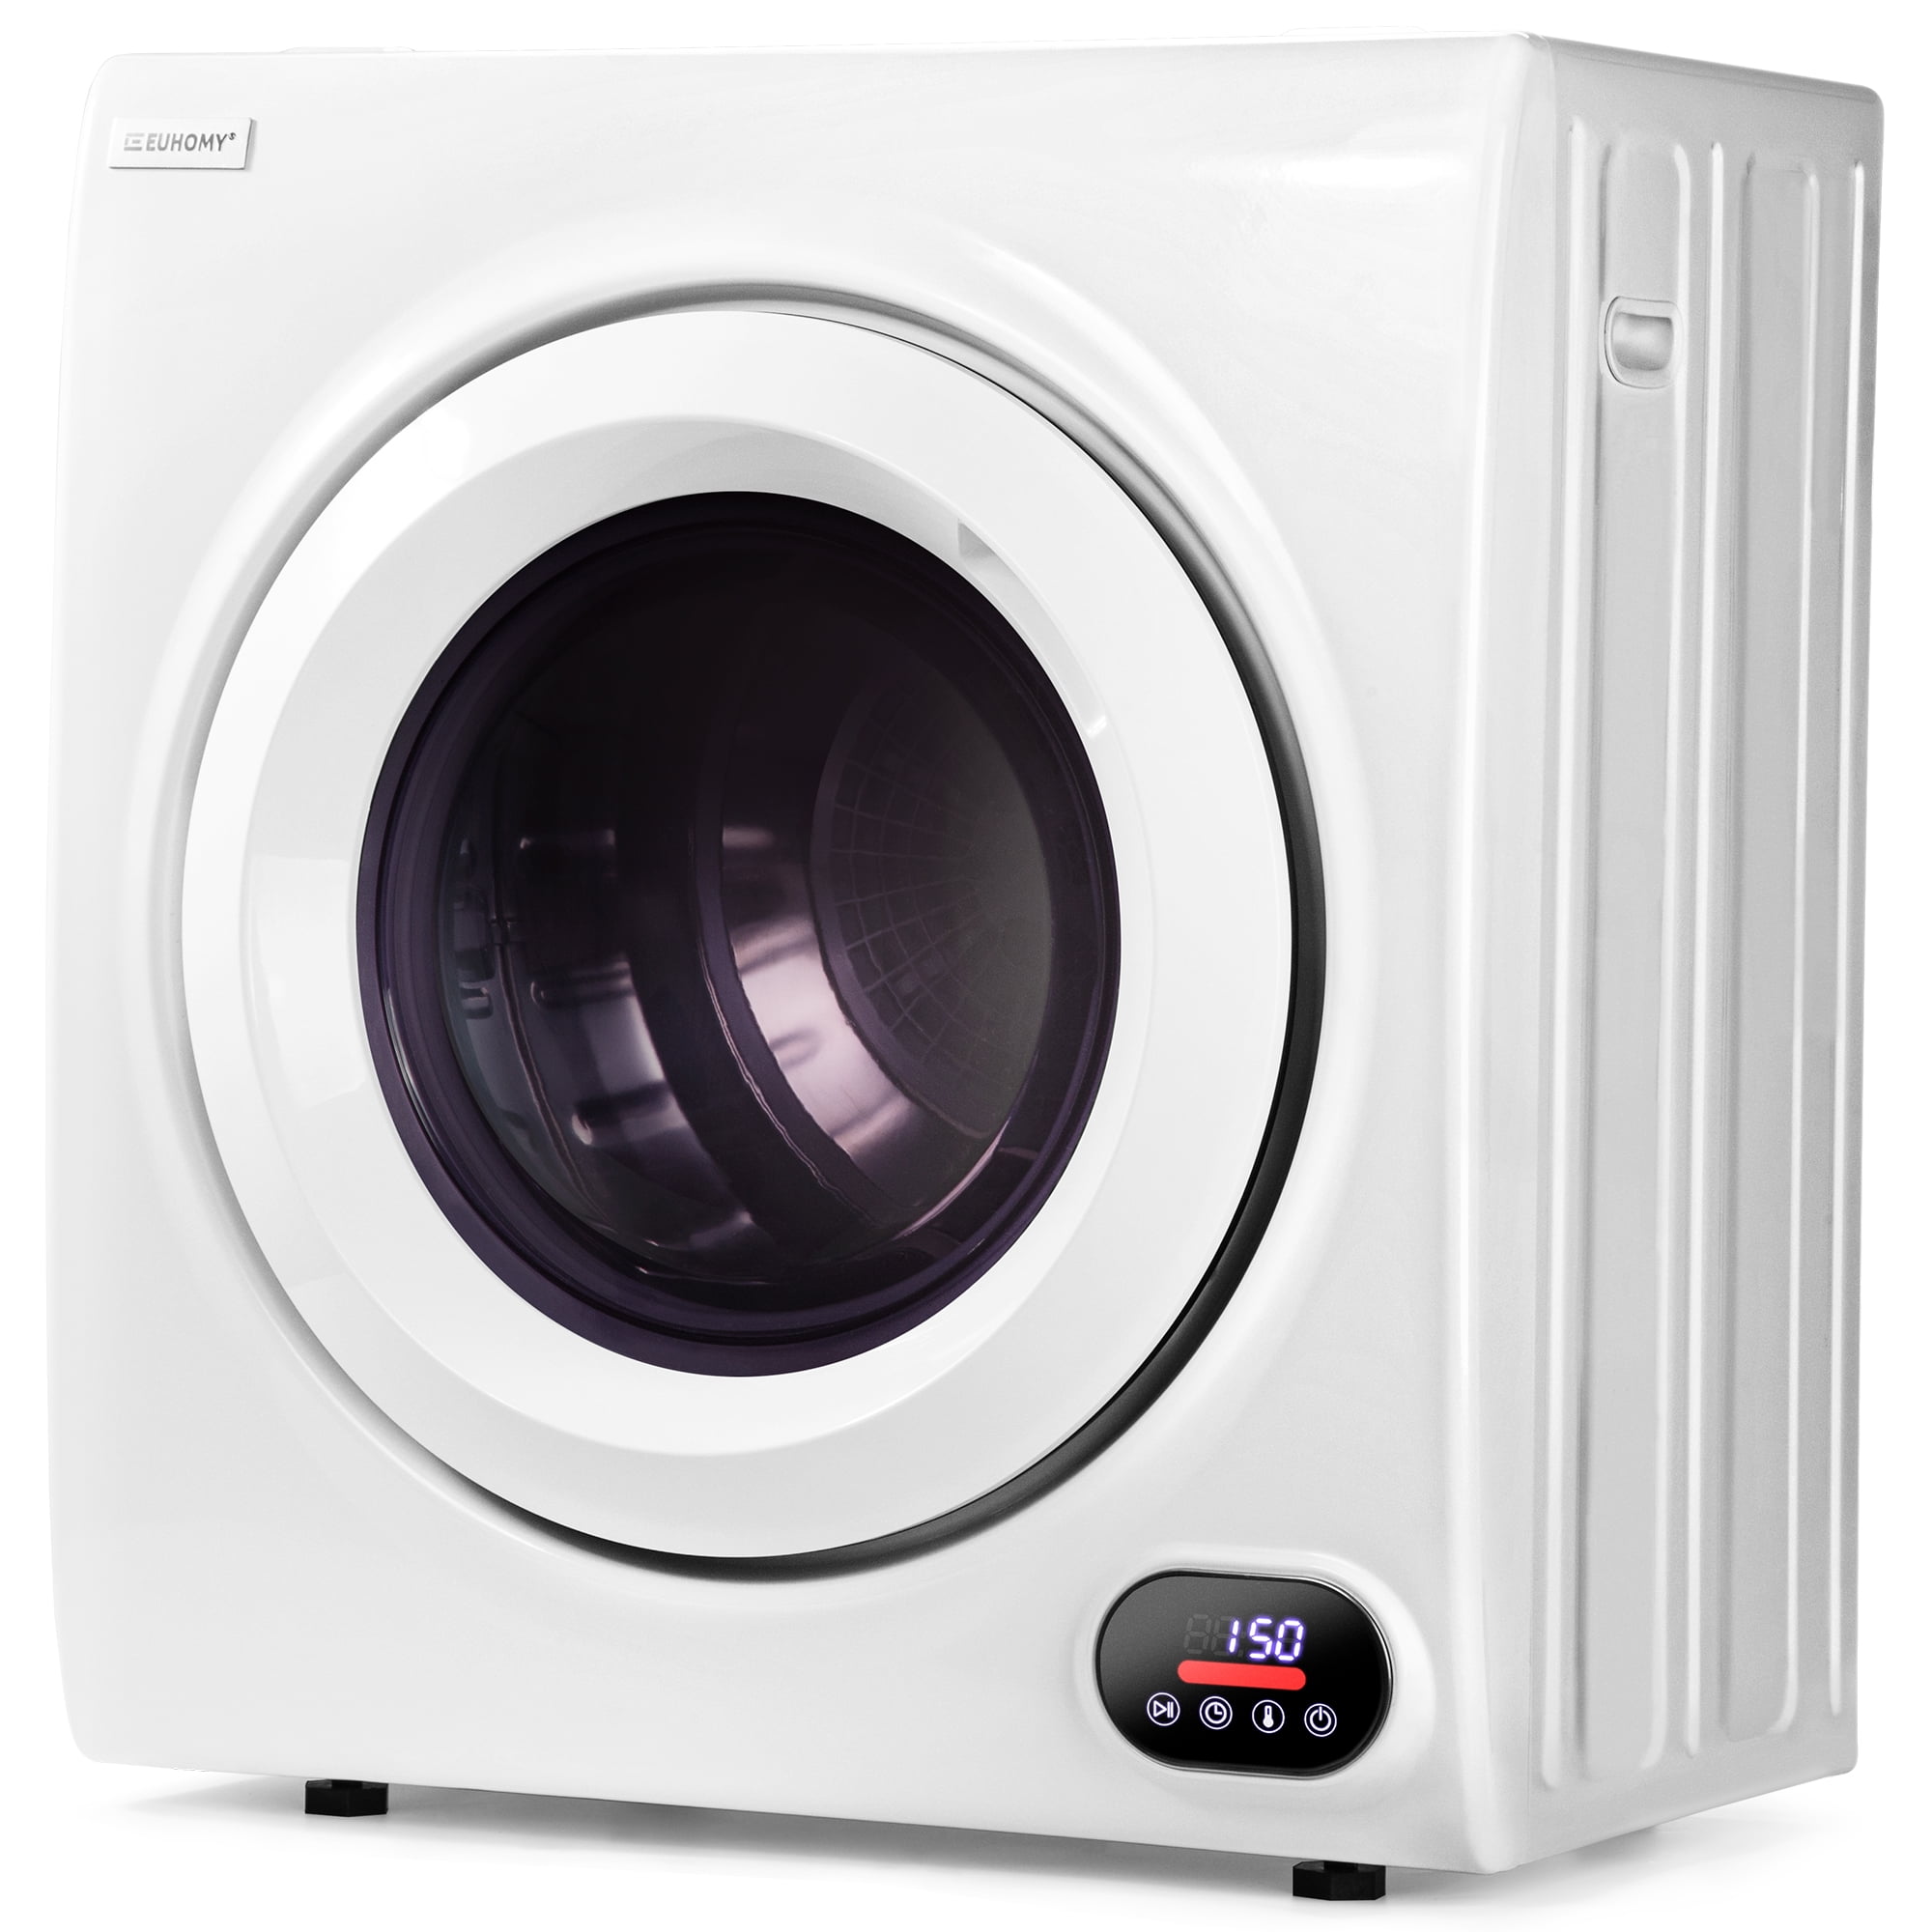 buy-euhomy-electric-compact-laundry-dryer-3-5-cu-ft-13-lbs-stainless